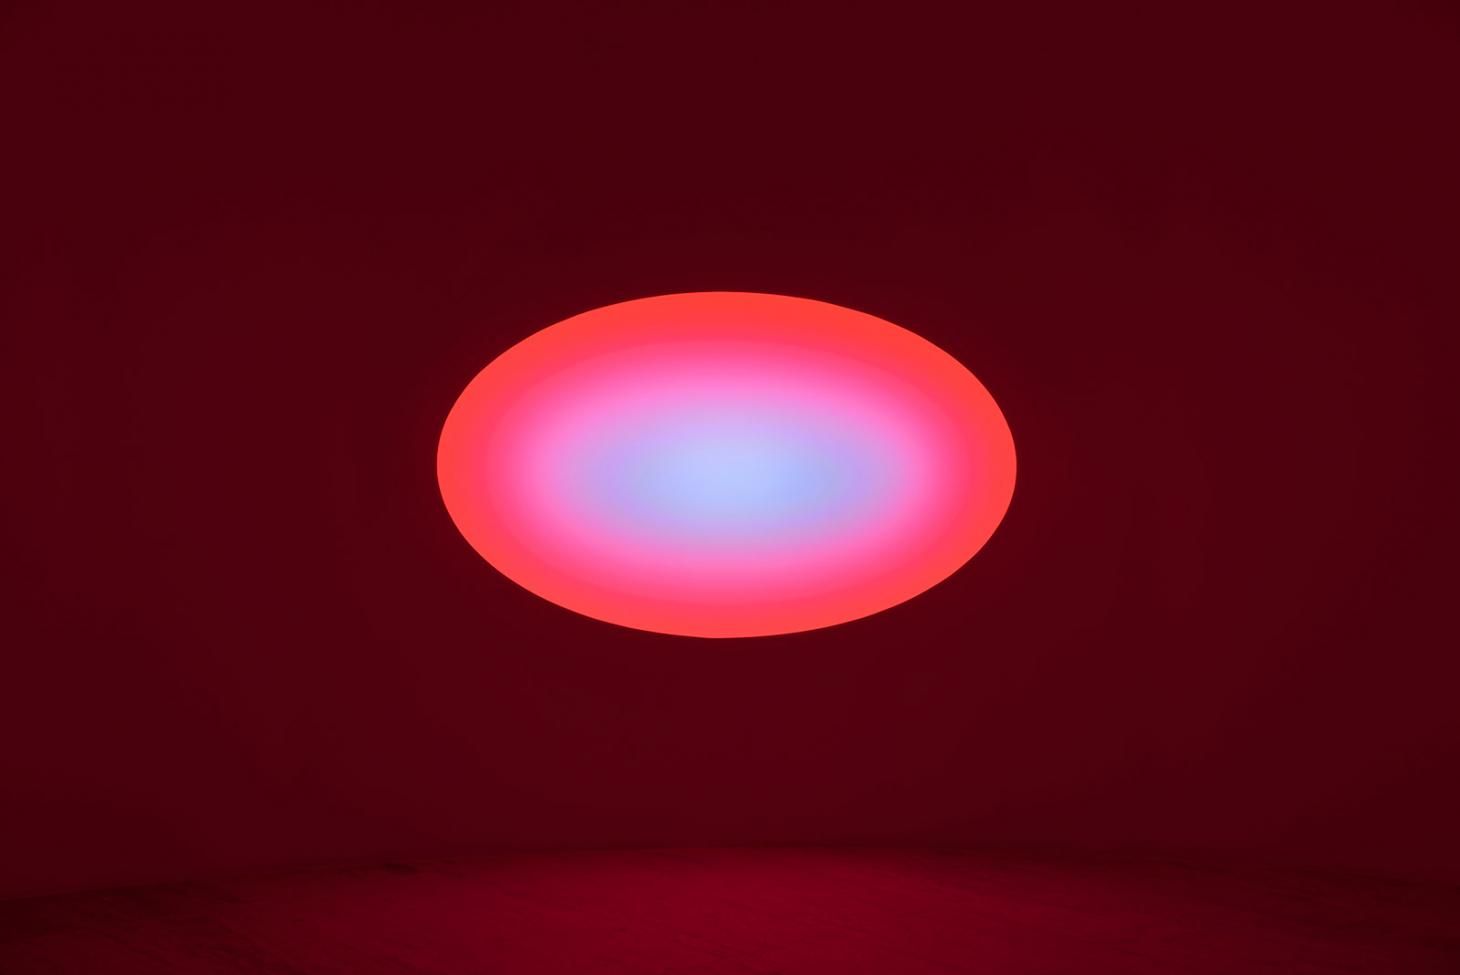 Beacon of Light The 7 Best James Turrell Works Youve Never Heard Of  Art  for Sale  Artspace